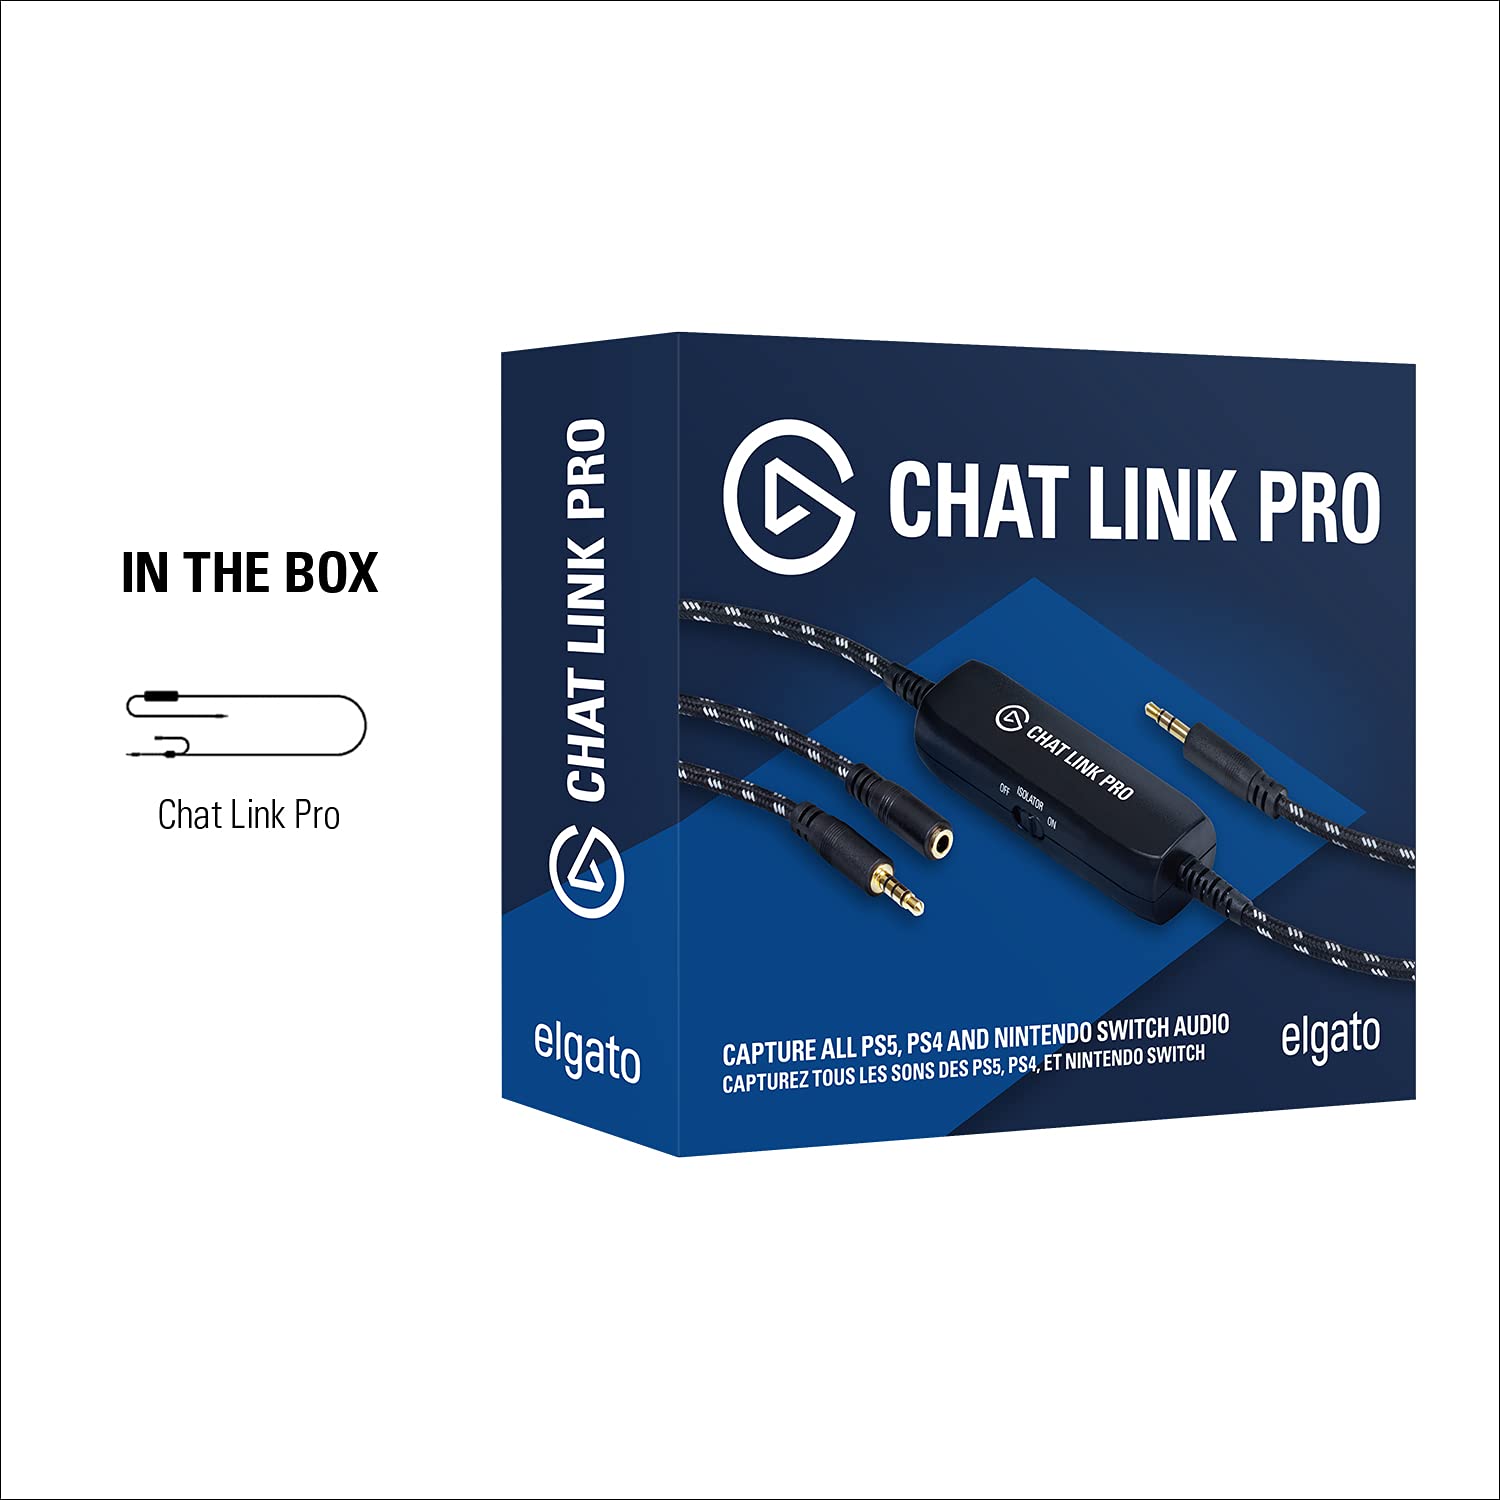 Elgato Chat Link Pro - Audio Adapter, for PS5, PS4, Nintendo Switch, Capture Voice Chat, Gameplay Sound, Extra Long Cable